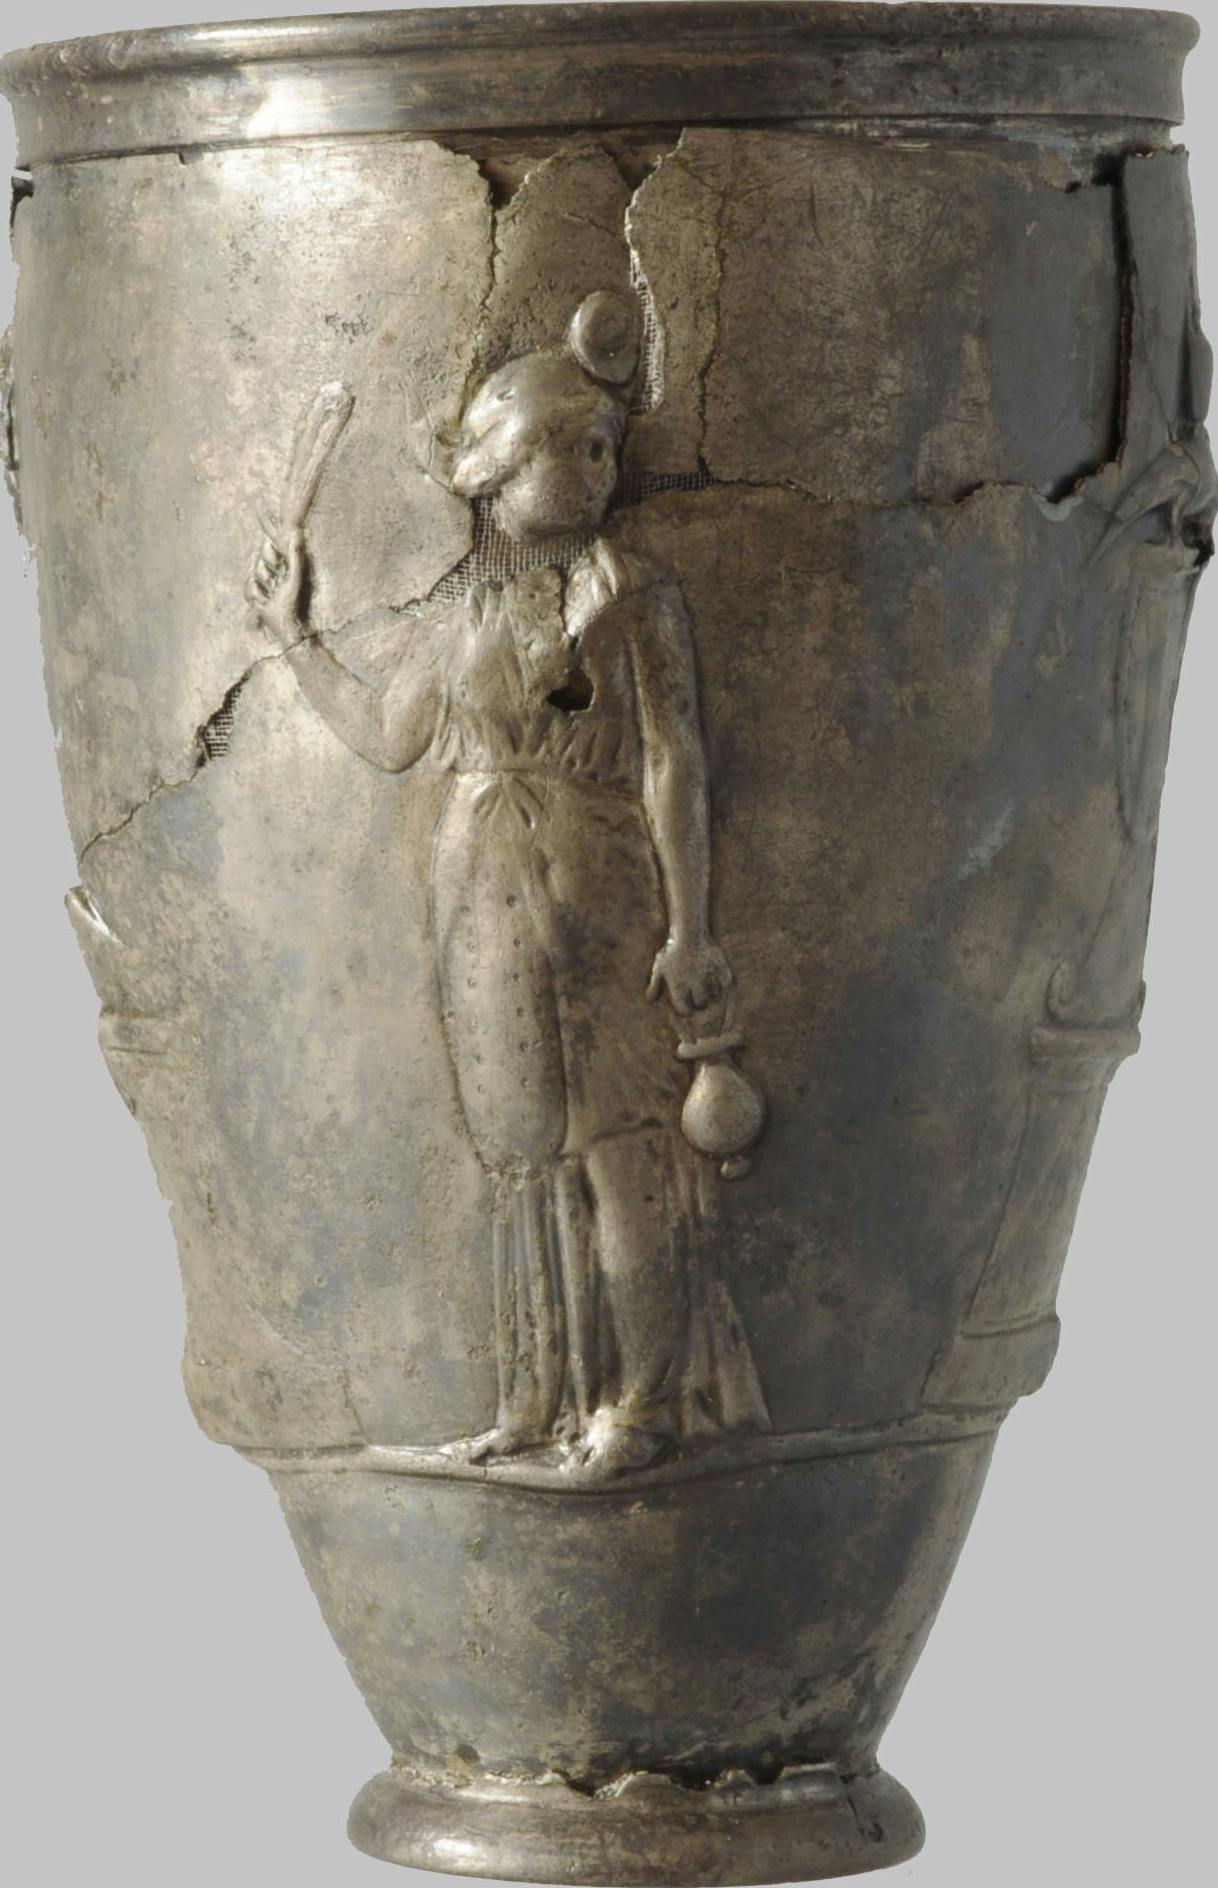 Becher mit Darstellungen aus dem Isiskult / Cup with representations of the cult of Isis